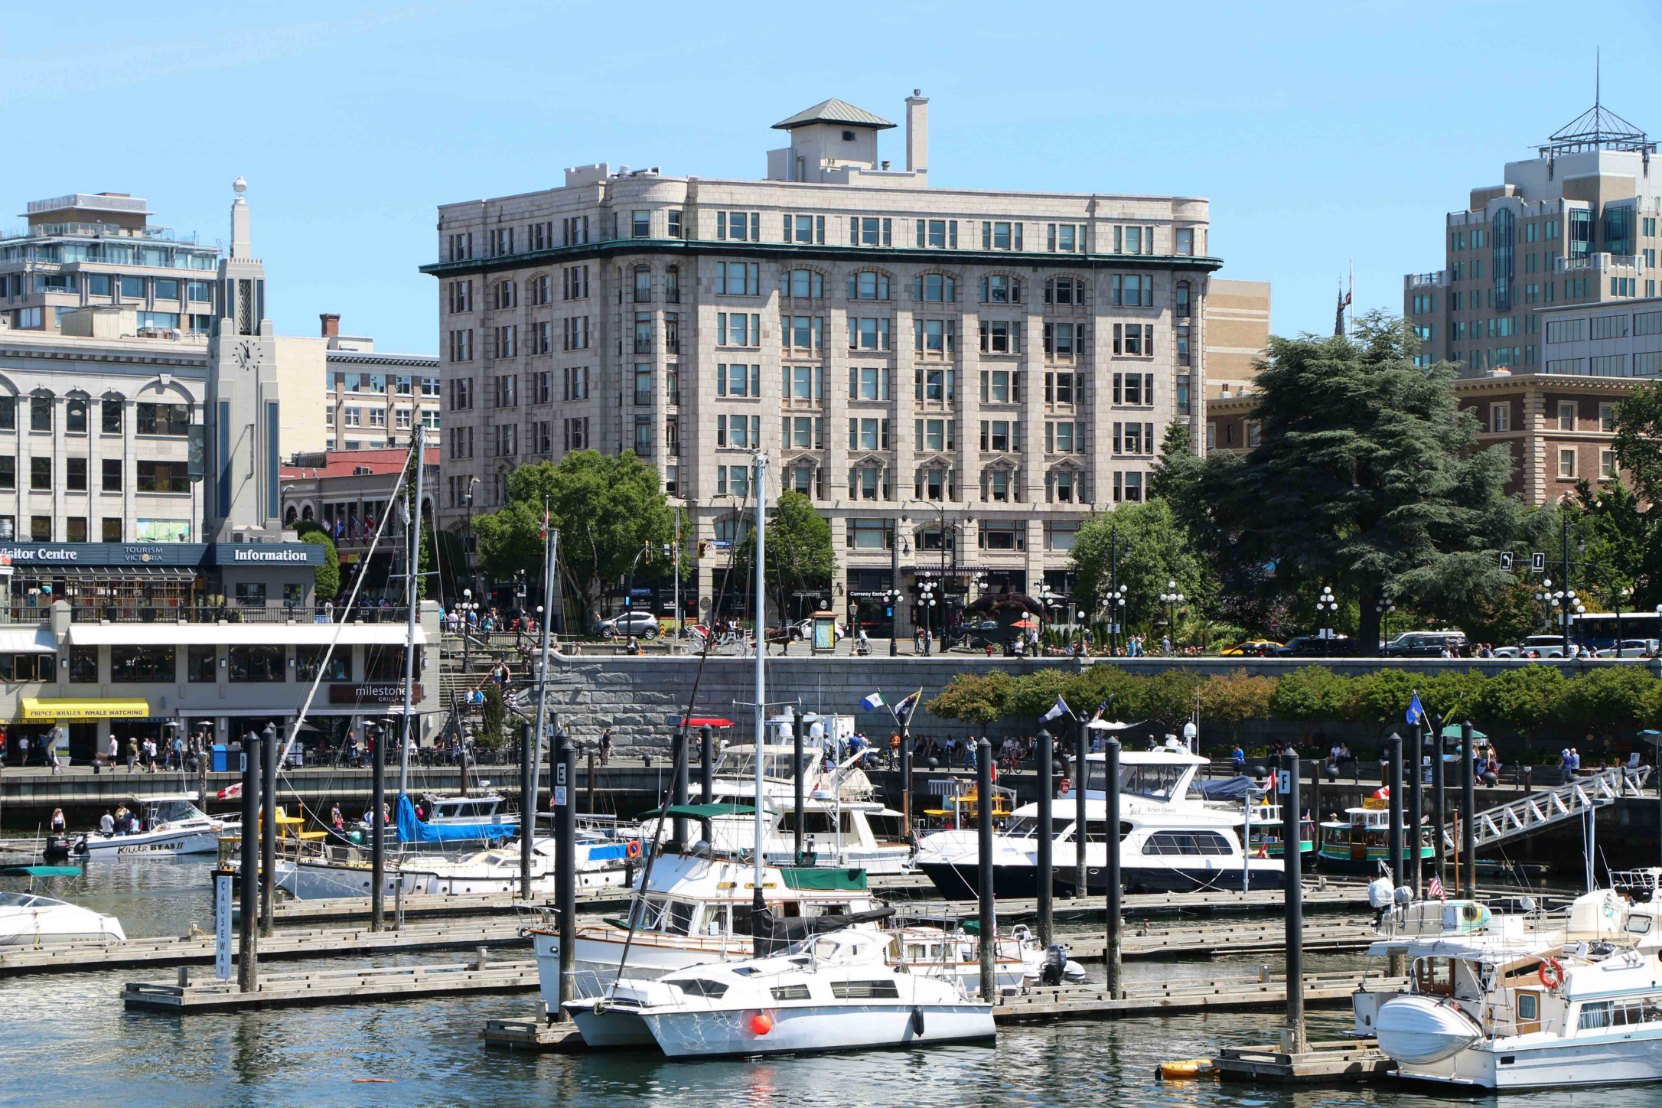 The Belmont Building and the Causeway, seen from the Steamship Terminal on Belleville Street